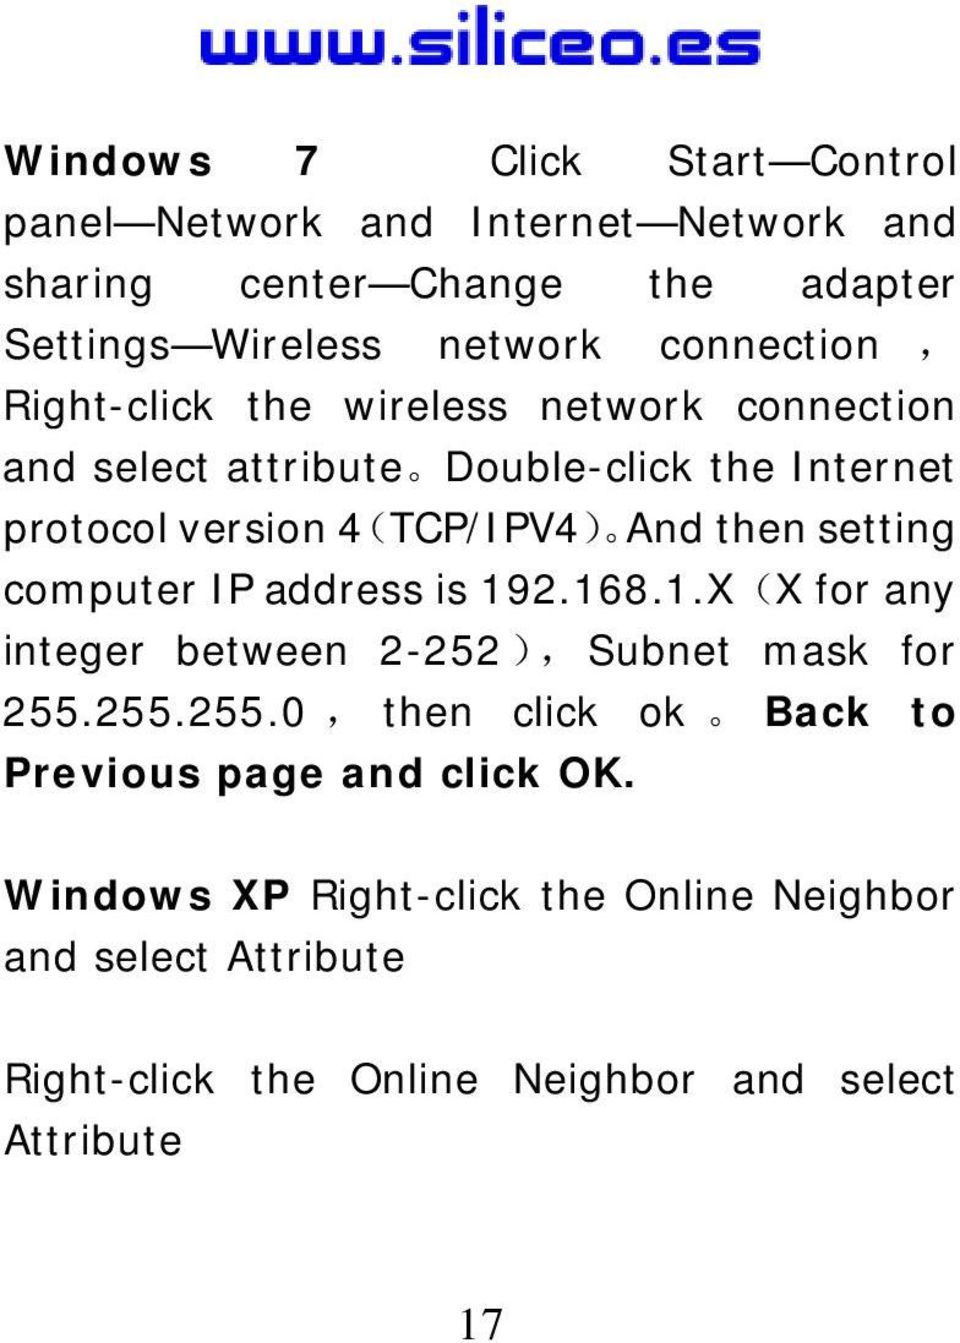 then setting computer IP address is 192.168.1.X(X for any integer between 2-252 ), Subnet mask for 255.